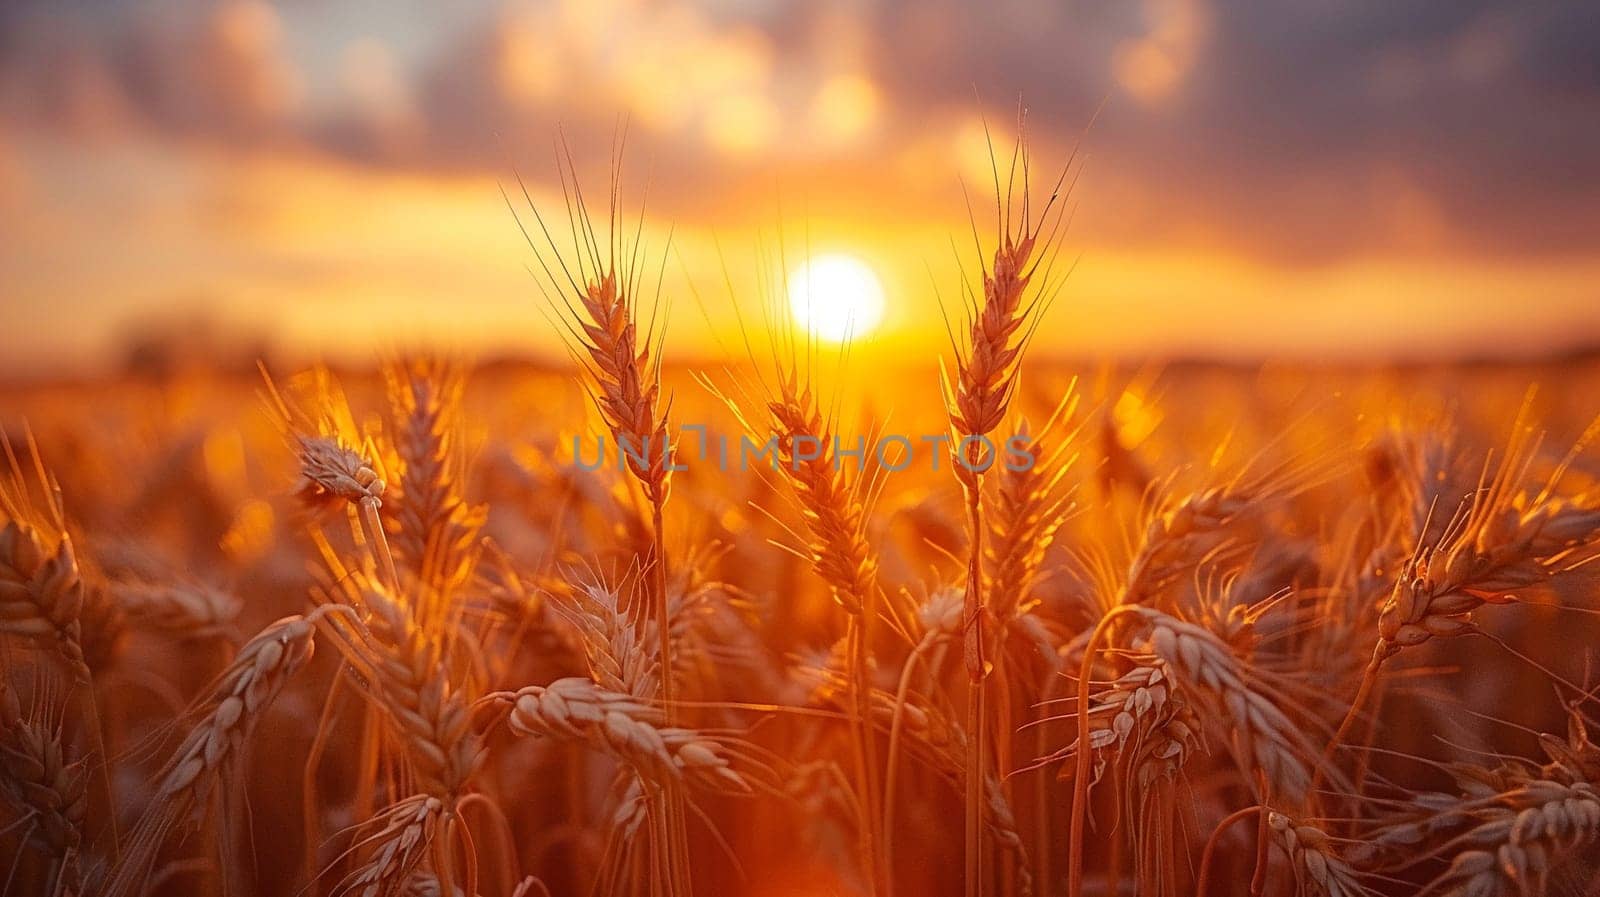 Golden wheat field at sunset, representing harvest and abundance.